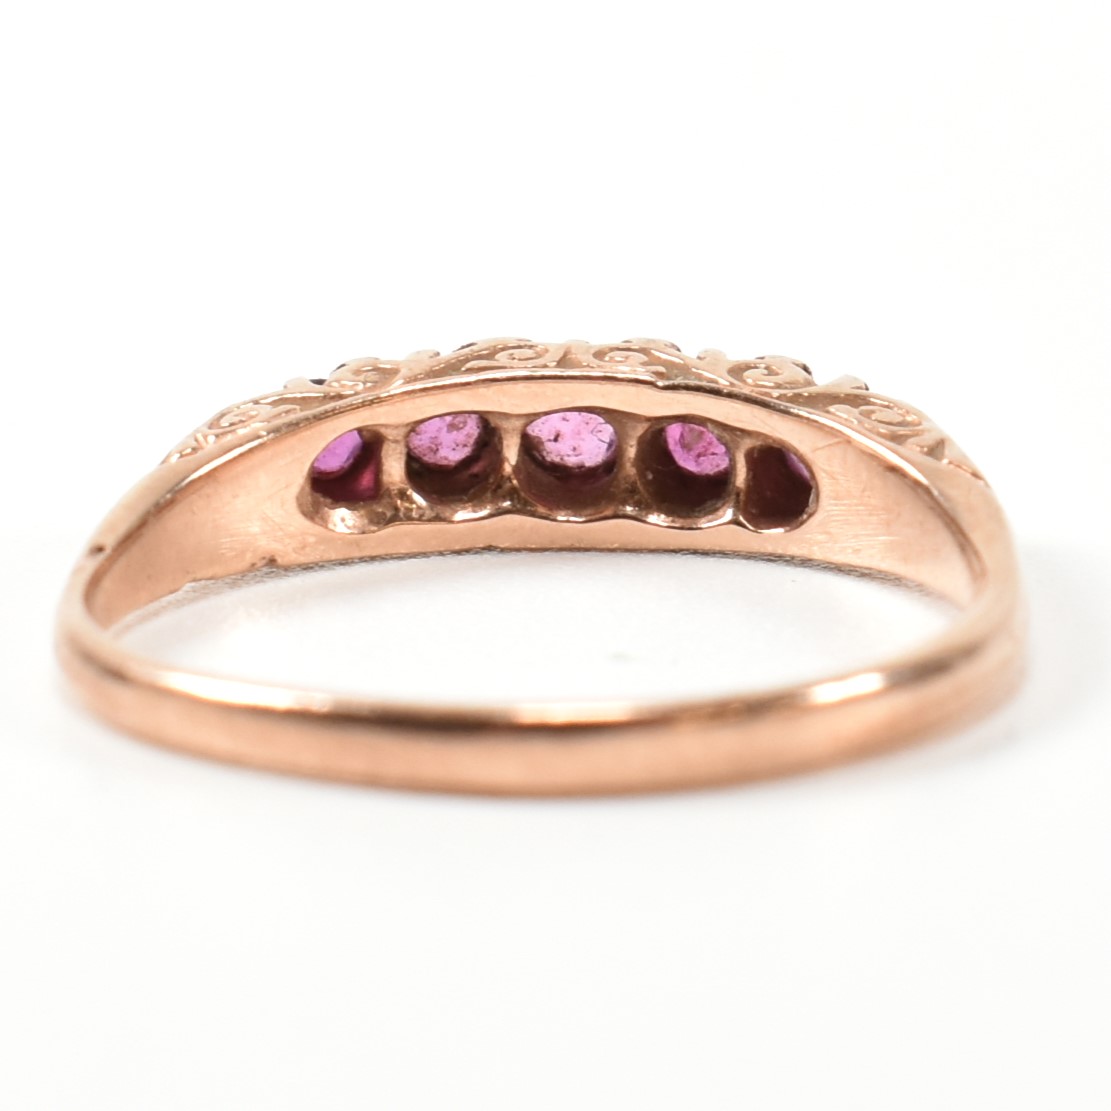 HALLMARKED 9CT ROSE GOLD & RUBY FIVE STONE GYPSY RING - Image 2 of 9